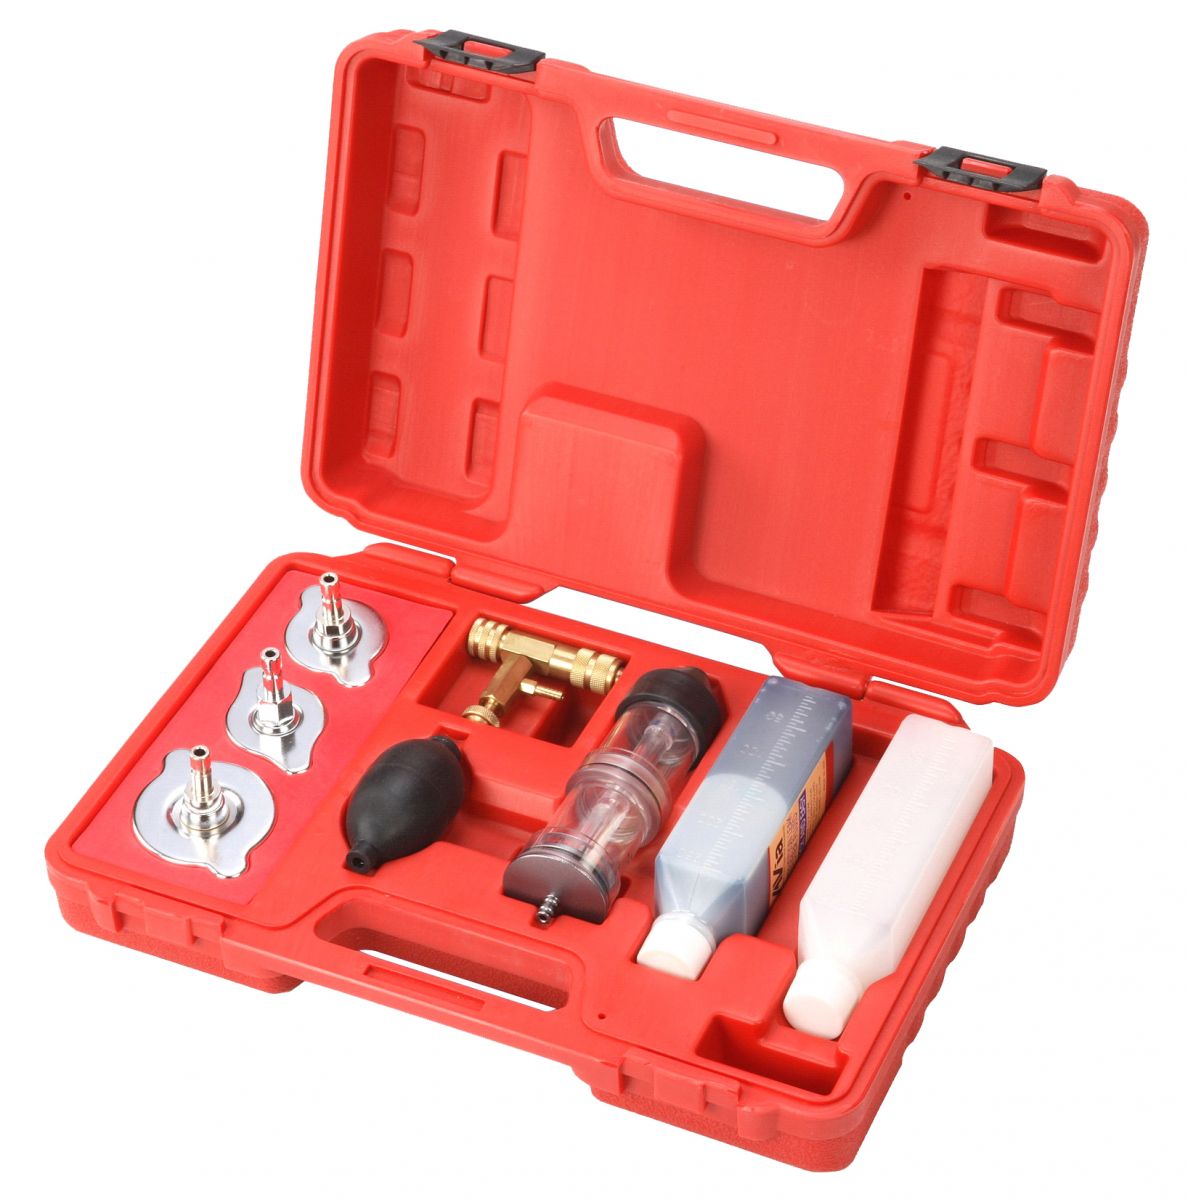 COMBUSTION GAS LEAK TESTER KIT WITH VERTICAL CHAMBERS